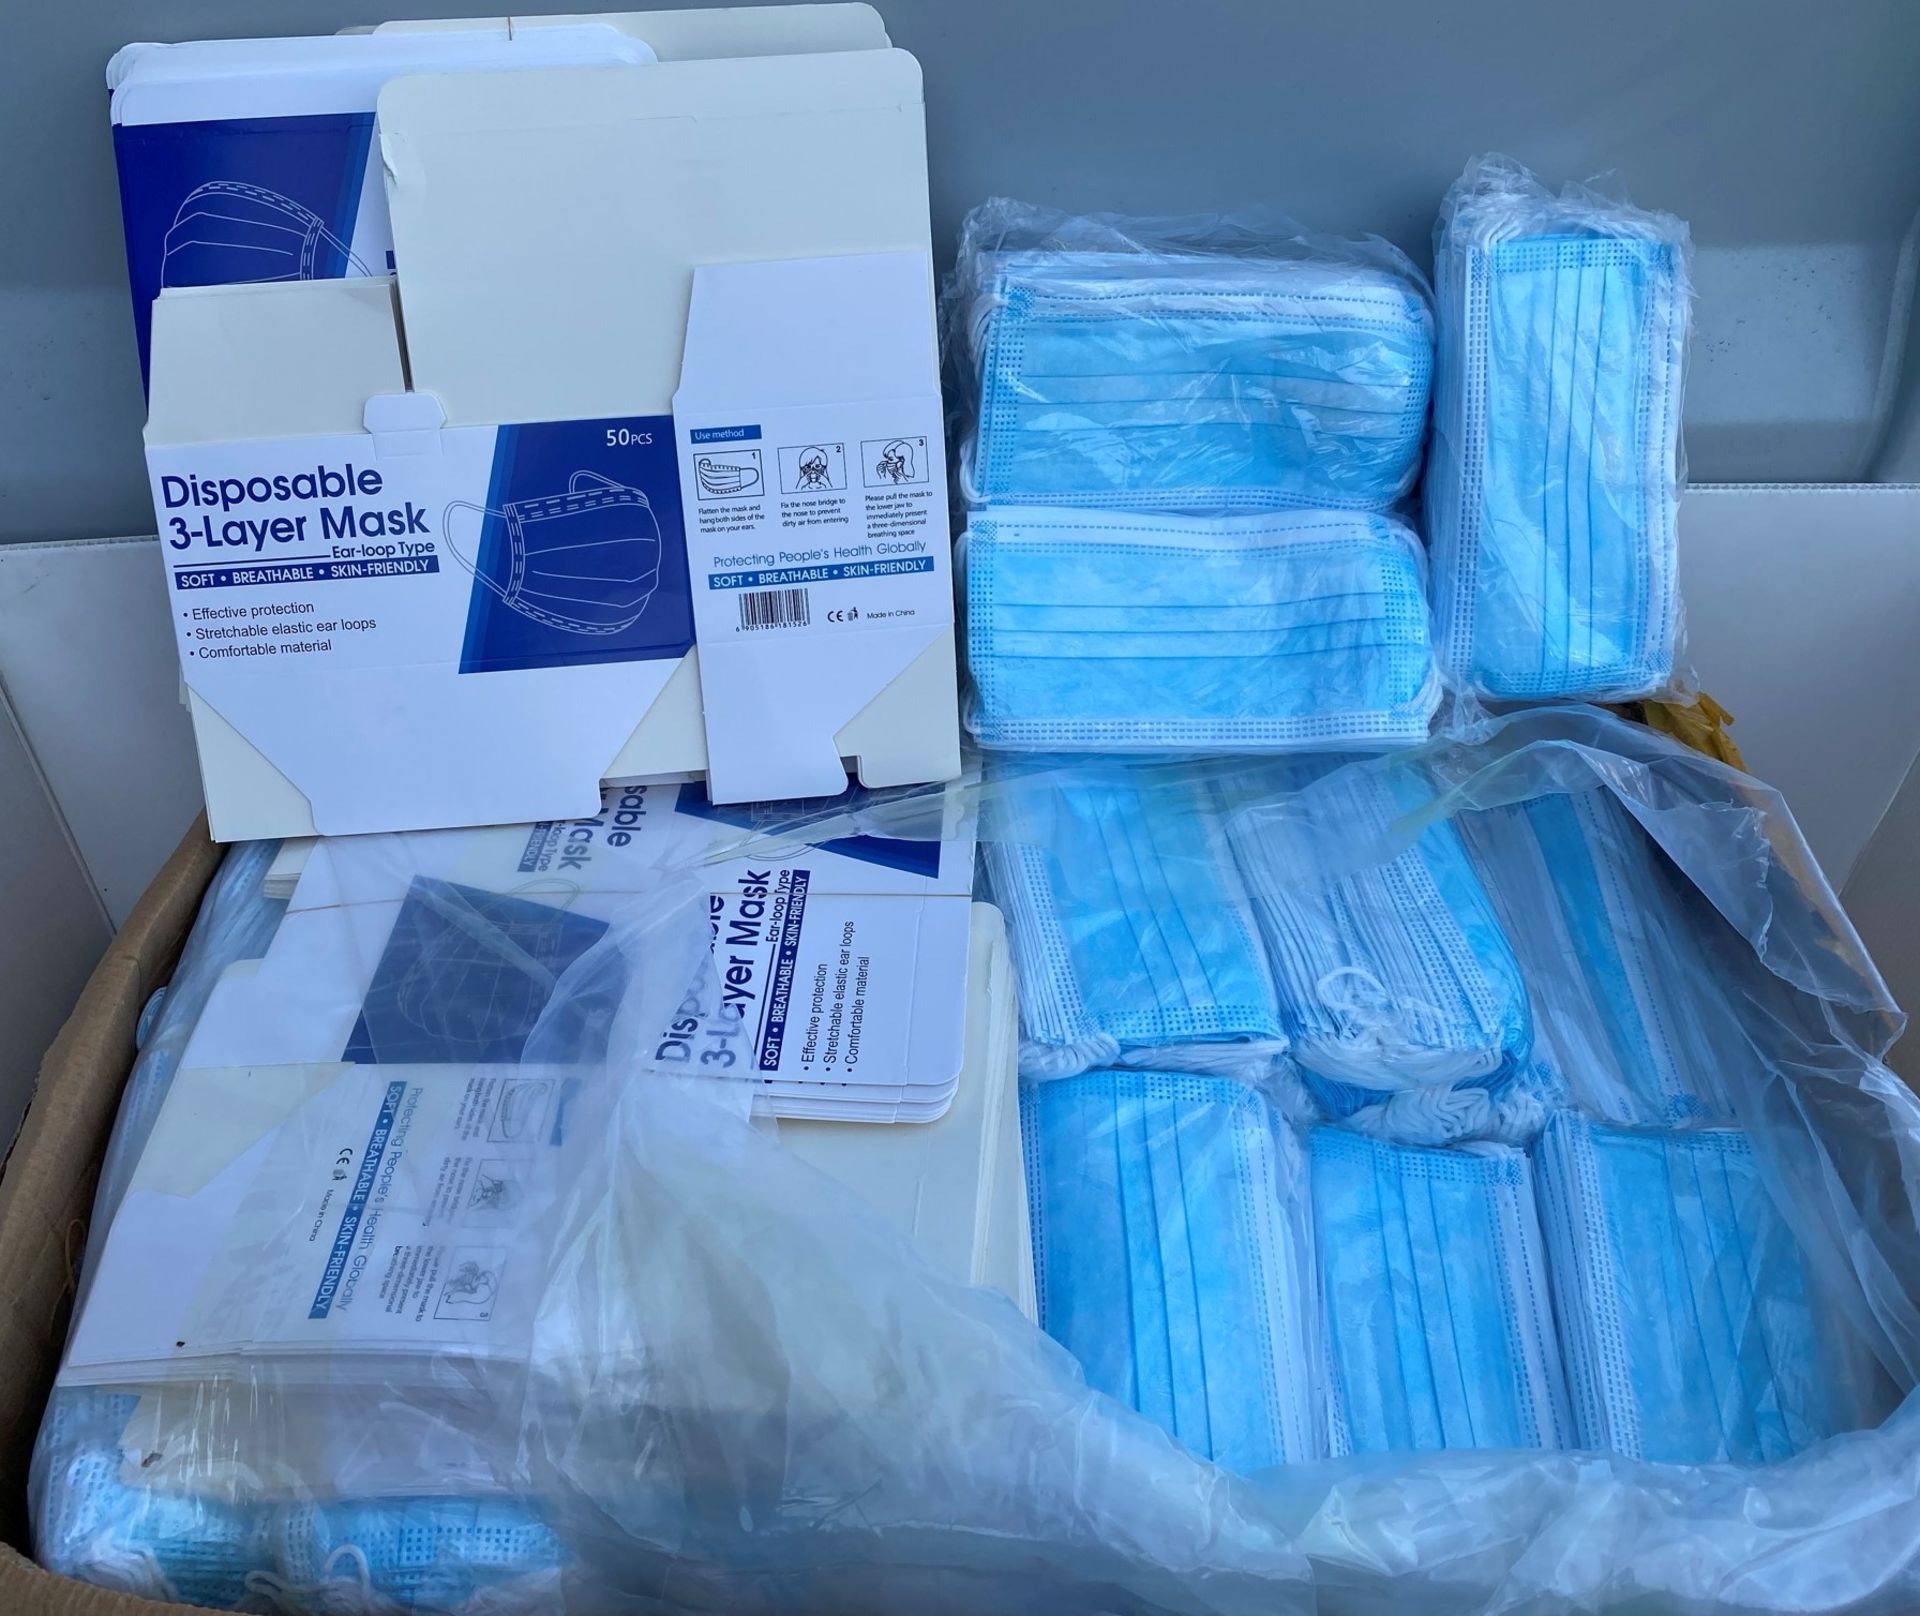 6000 x Disposable 3-layer face masks - blue/white masks sealed in packets and box contains flatpack